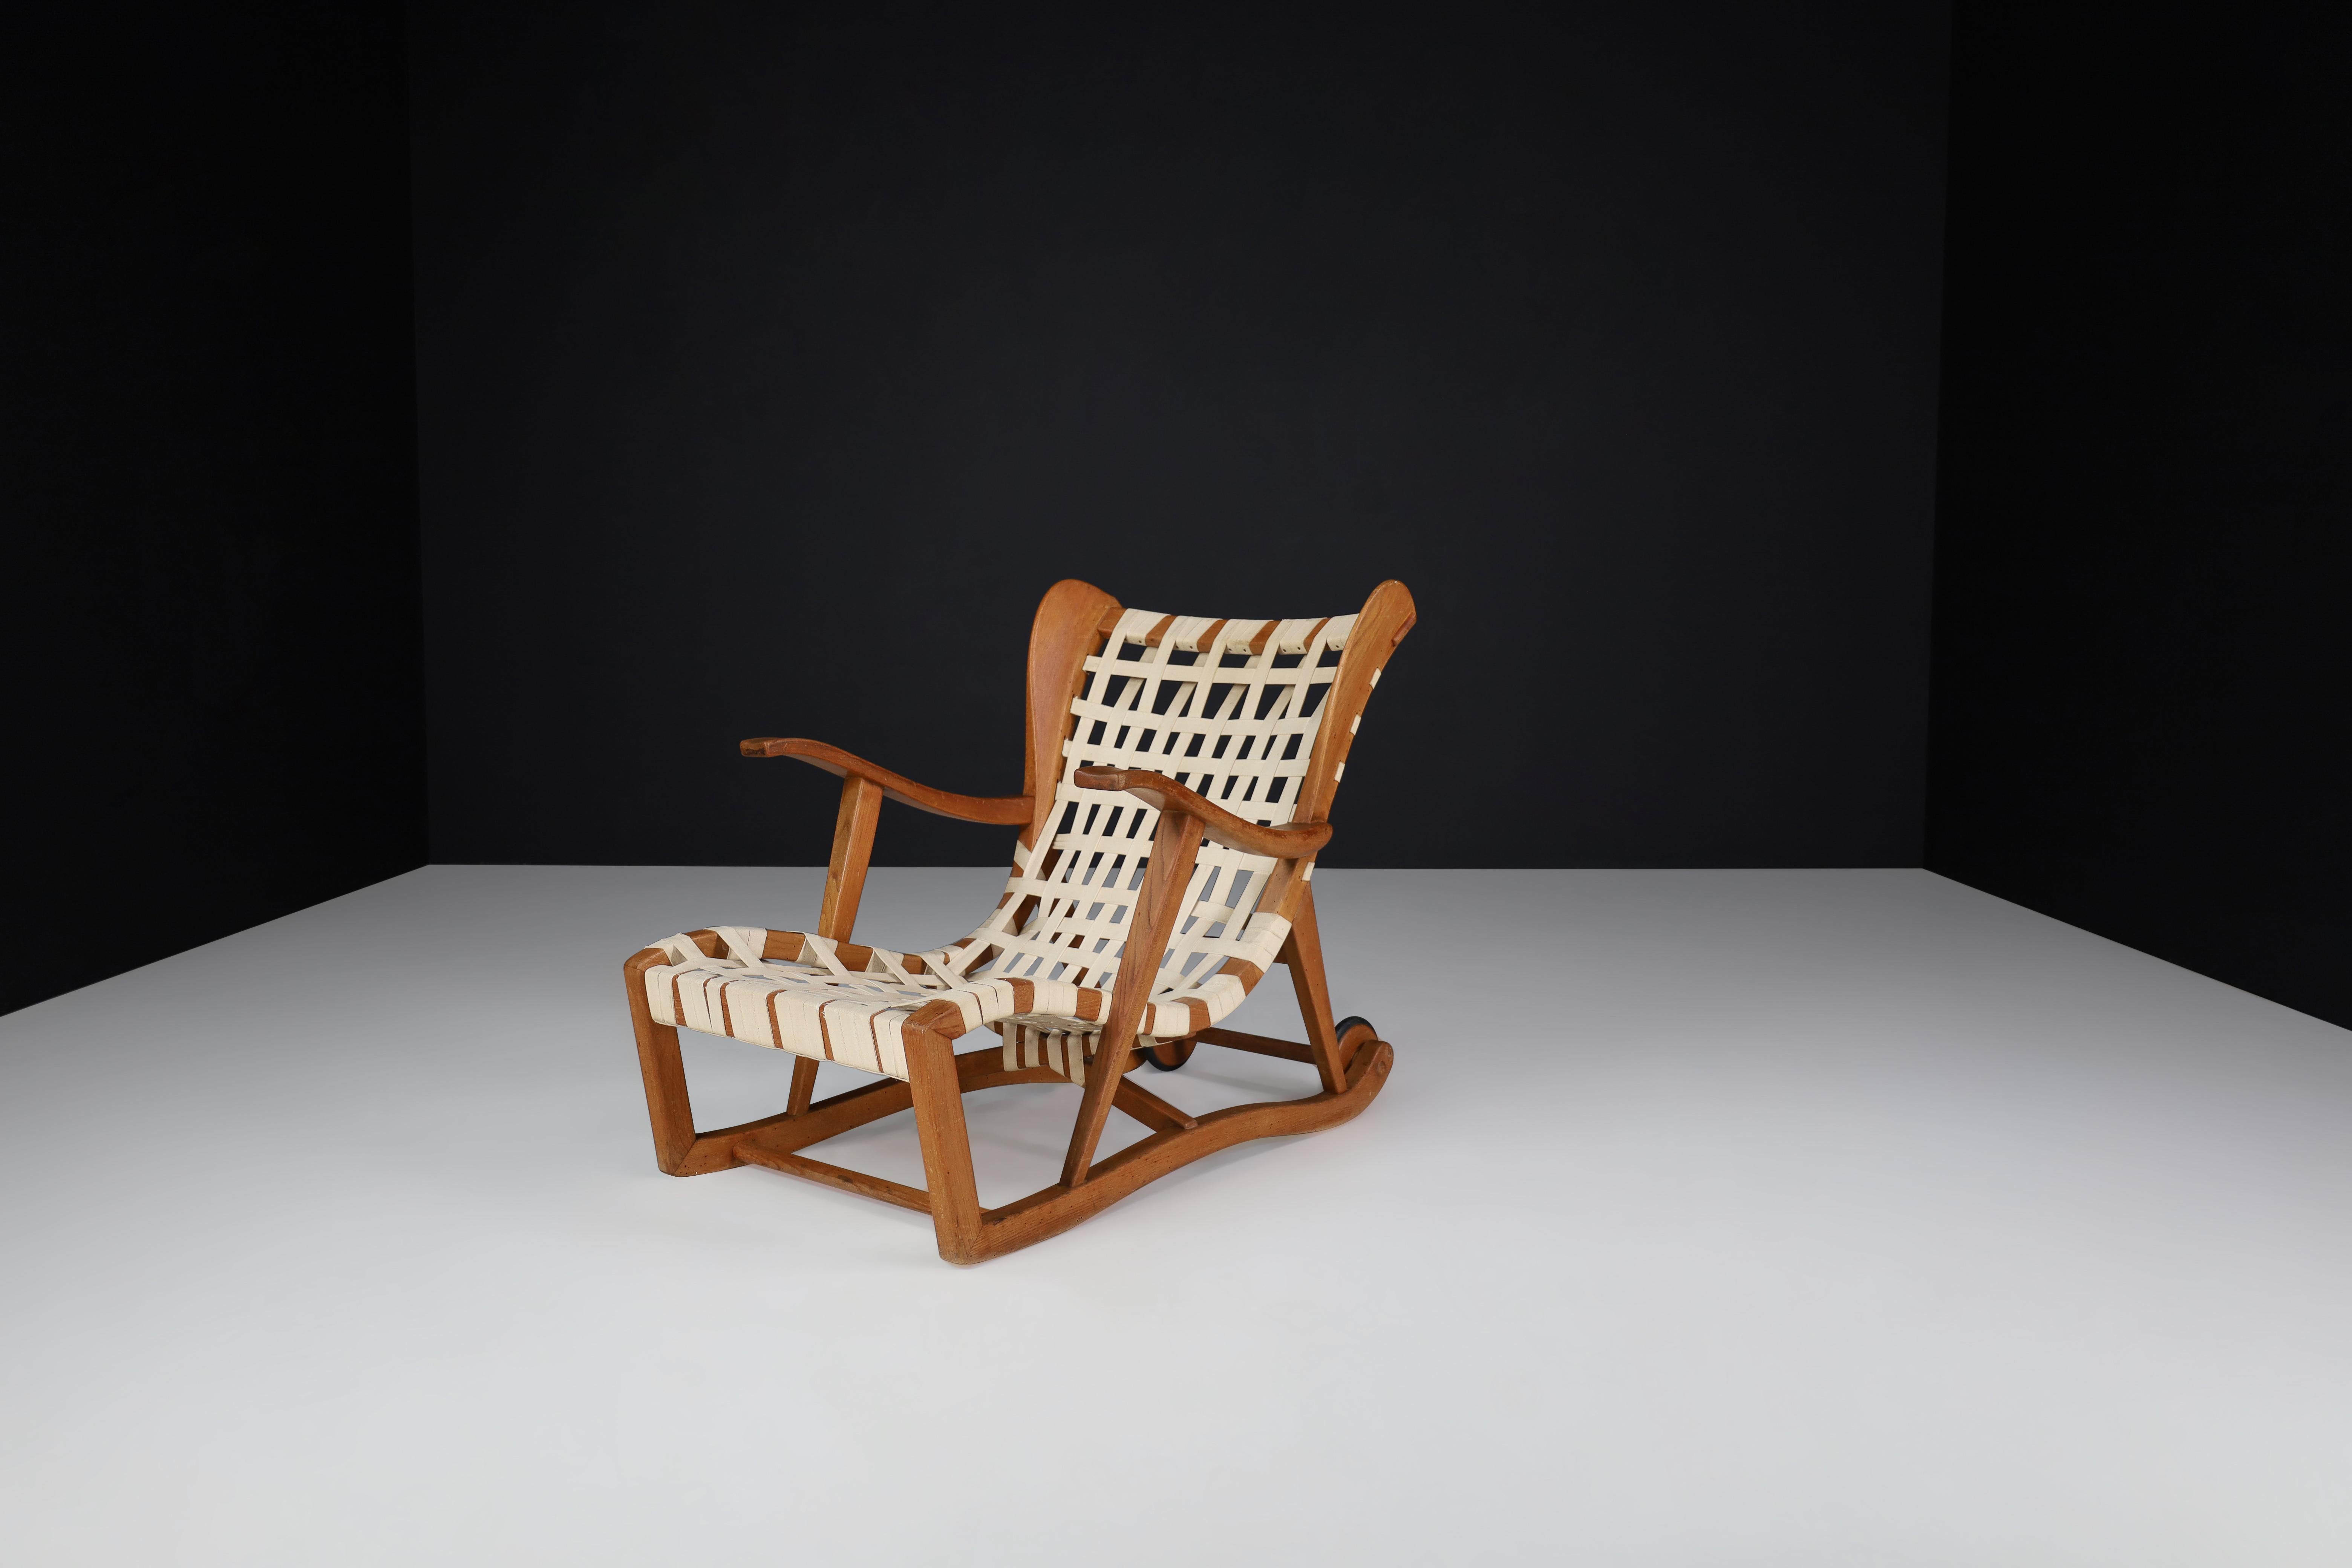 Sculptural oak Lounge chair by Guglielmo Pecorini, Italy, the 1950s

Sculptural lounge chair in oak, linen straps with two back wheels, designed by Guglielmo Pecorini in the 1950s. The oak frame and linen straps show traces of age and use but are in